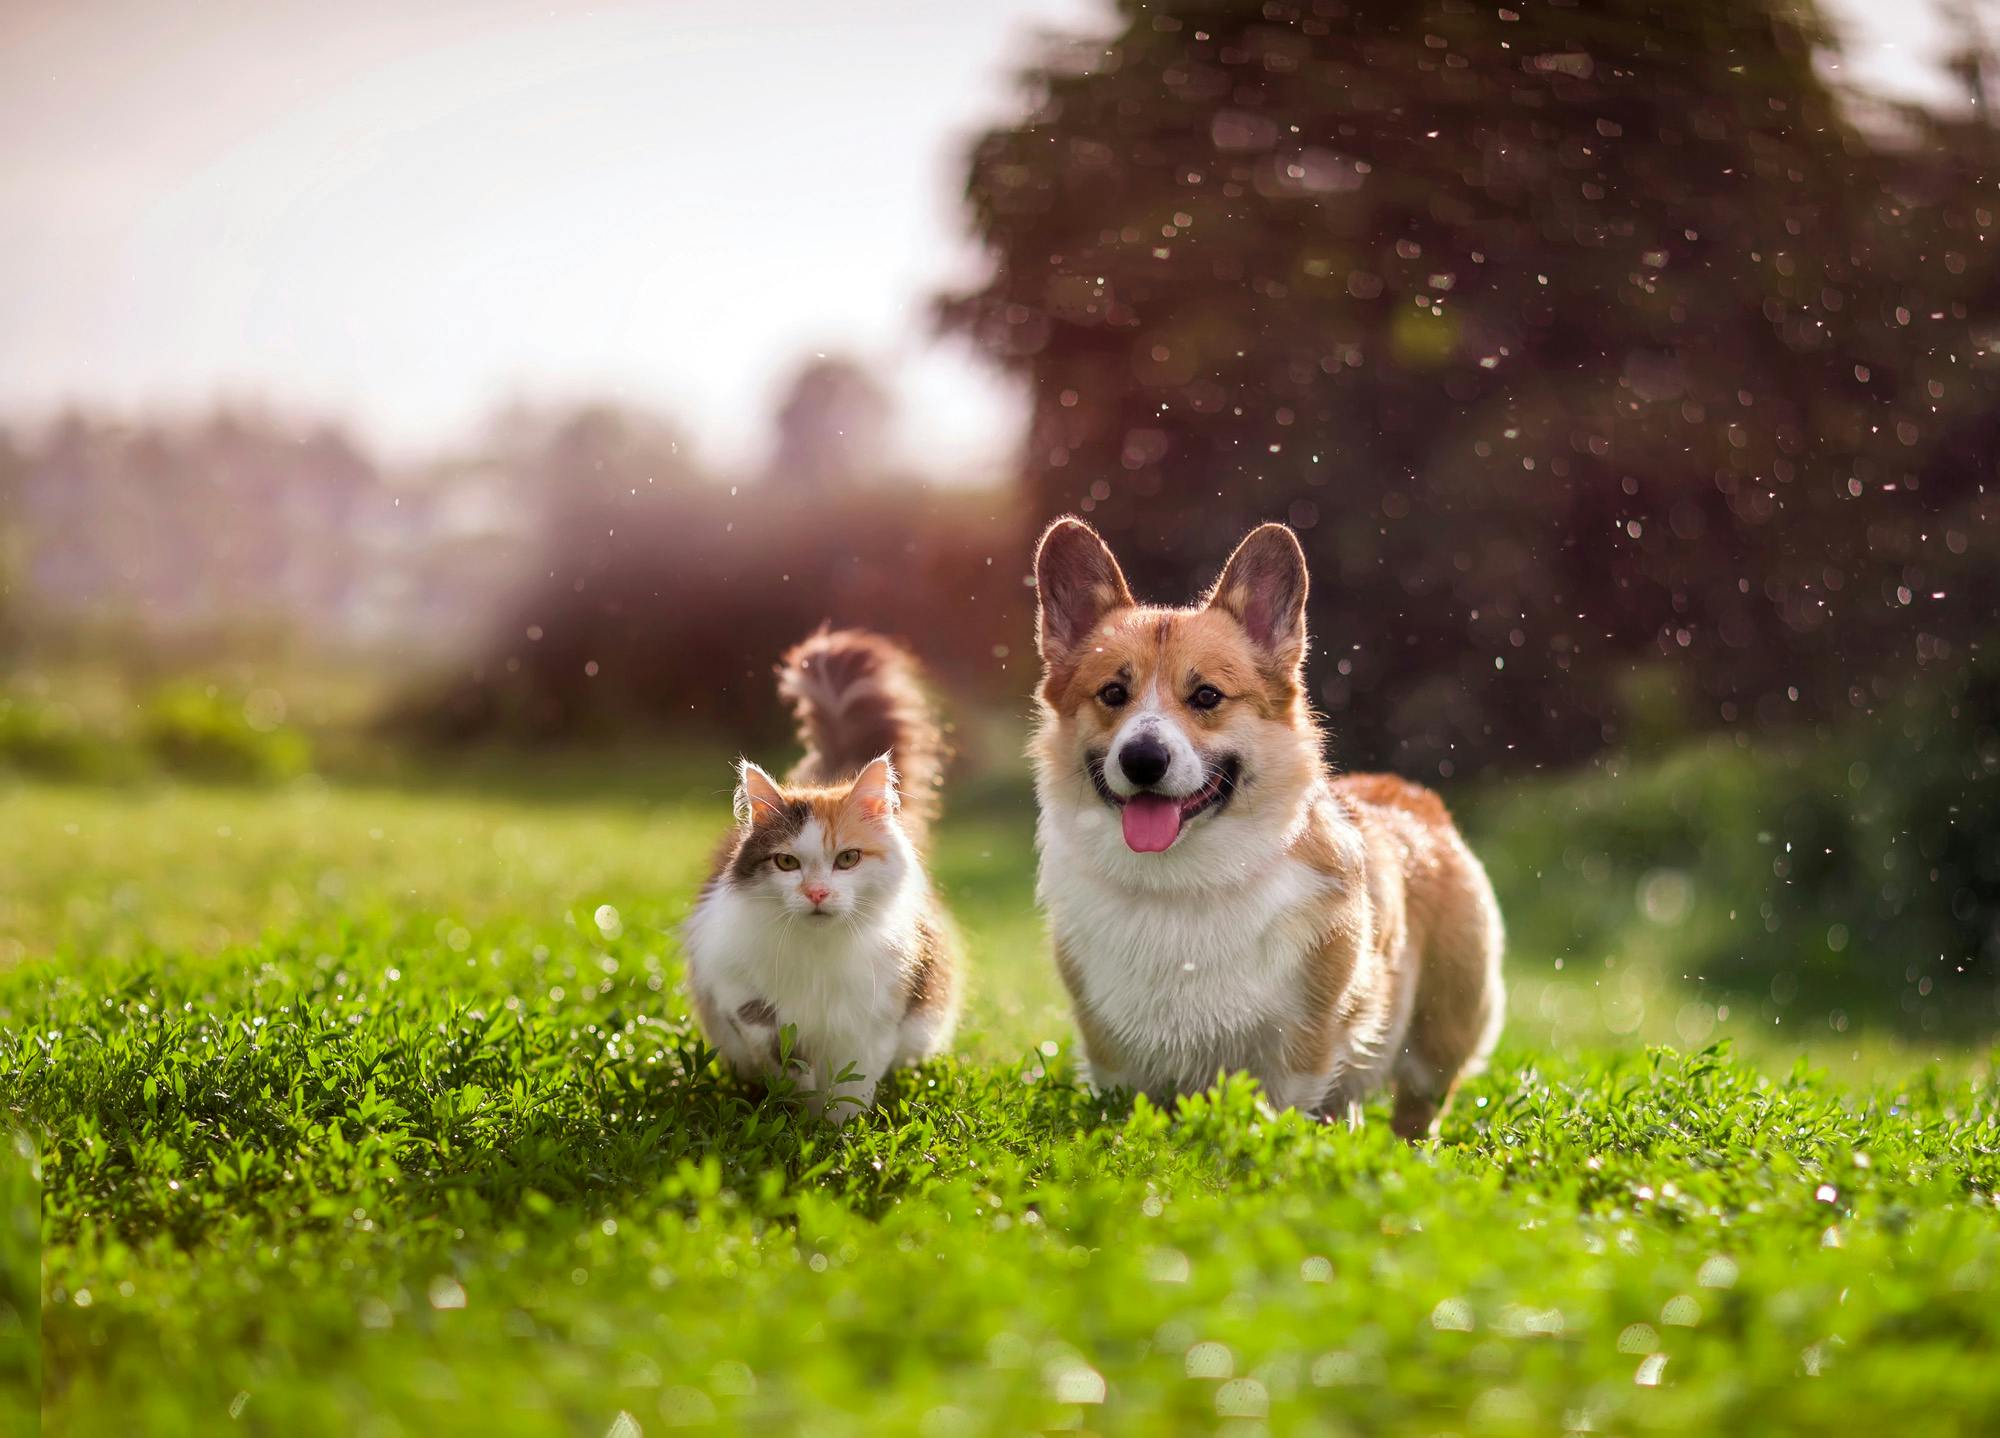 Fluffy cat and Corgi walking in a field together